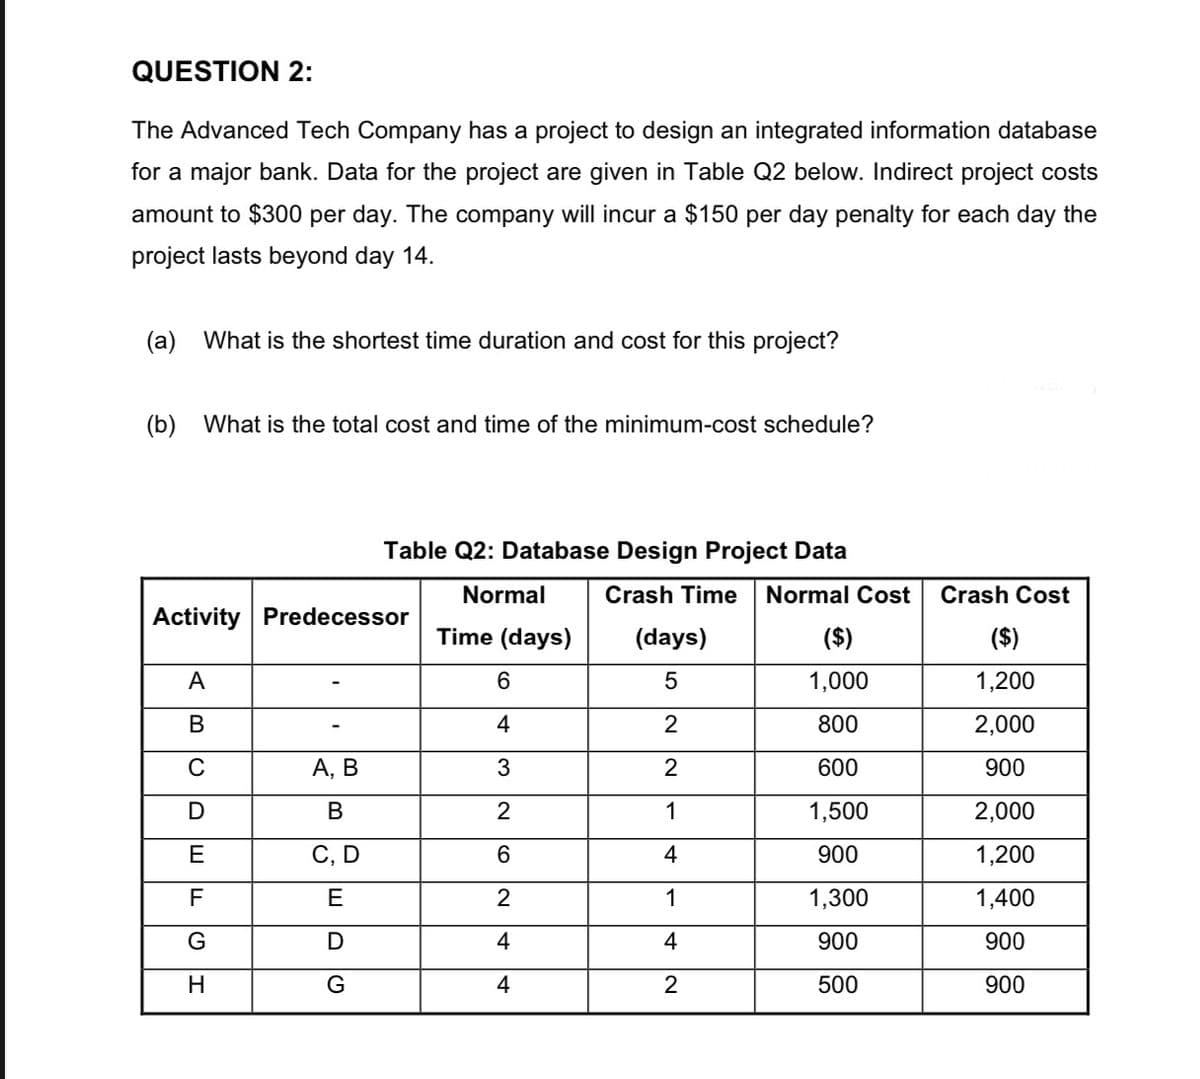 QUESTION 2:
The Advanced Tech Company has a project to design an integrated information database
for a major bank. Data for the project are given in Table Q2 below. Indirect project costs
amount to $300 per day. The company will incur a $150 per day penalty for each day the
project lasts beyond day 14.
(a) What is the shortest time duration and cost for this project?
(b) What is the total cost and time of the minimum-cost schedule?
Activity Predecessor
A
B
C
D
E
F
G
H
Table Q2: Database Design Project Data
Normal
Time (days)
6
4
3
2
6
2
4
4
A, B
B
C, D
E
D
G
Crash Time Normal Cost Crash Cost
(days)
5
2
2
1
4
1
4
2
($)
1,000
800
600
1,500
900
1,300
900
500
($)
1,200
2,000
900
2,000
1,200
1,400
900
900